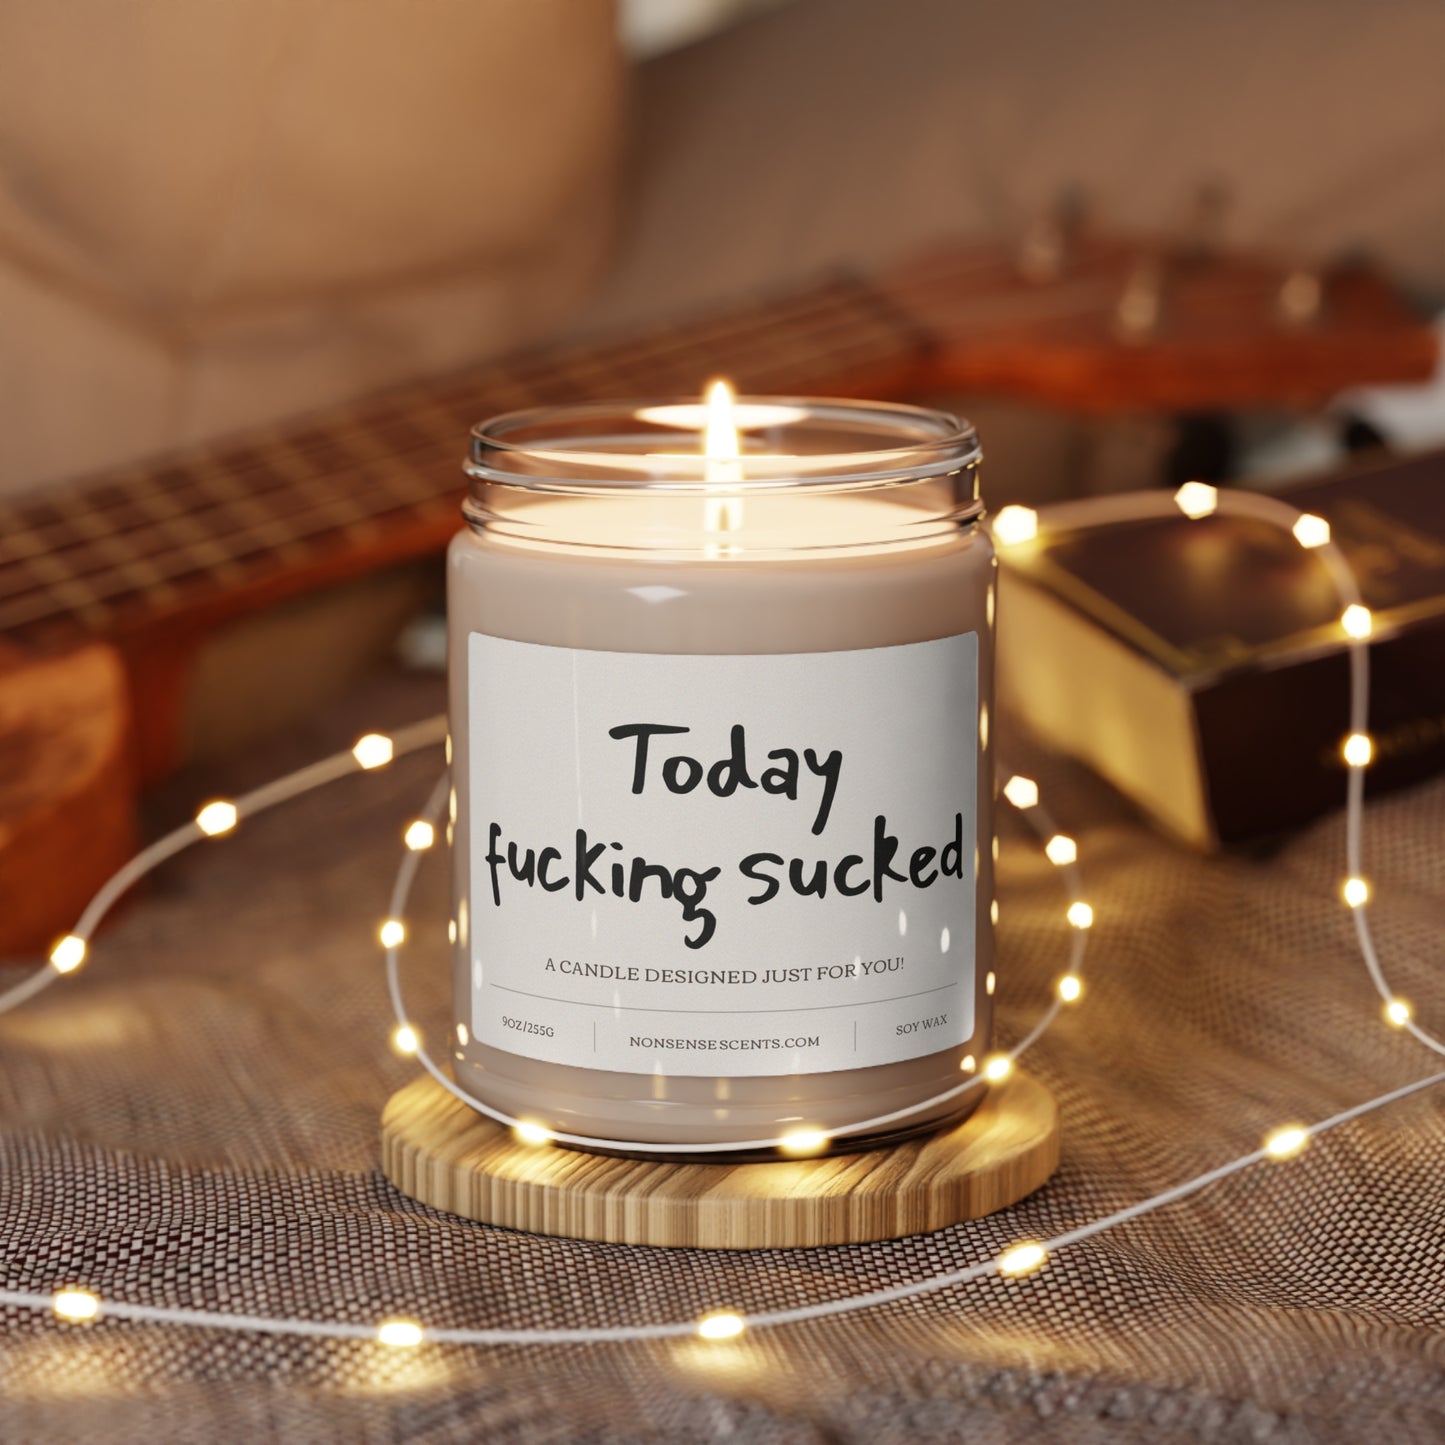 "Today Fucking Sucked" Scented Candle